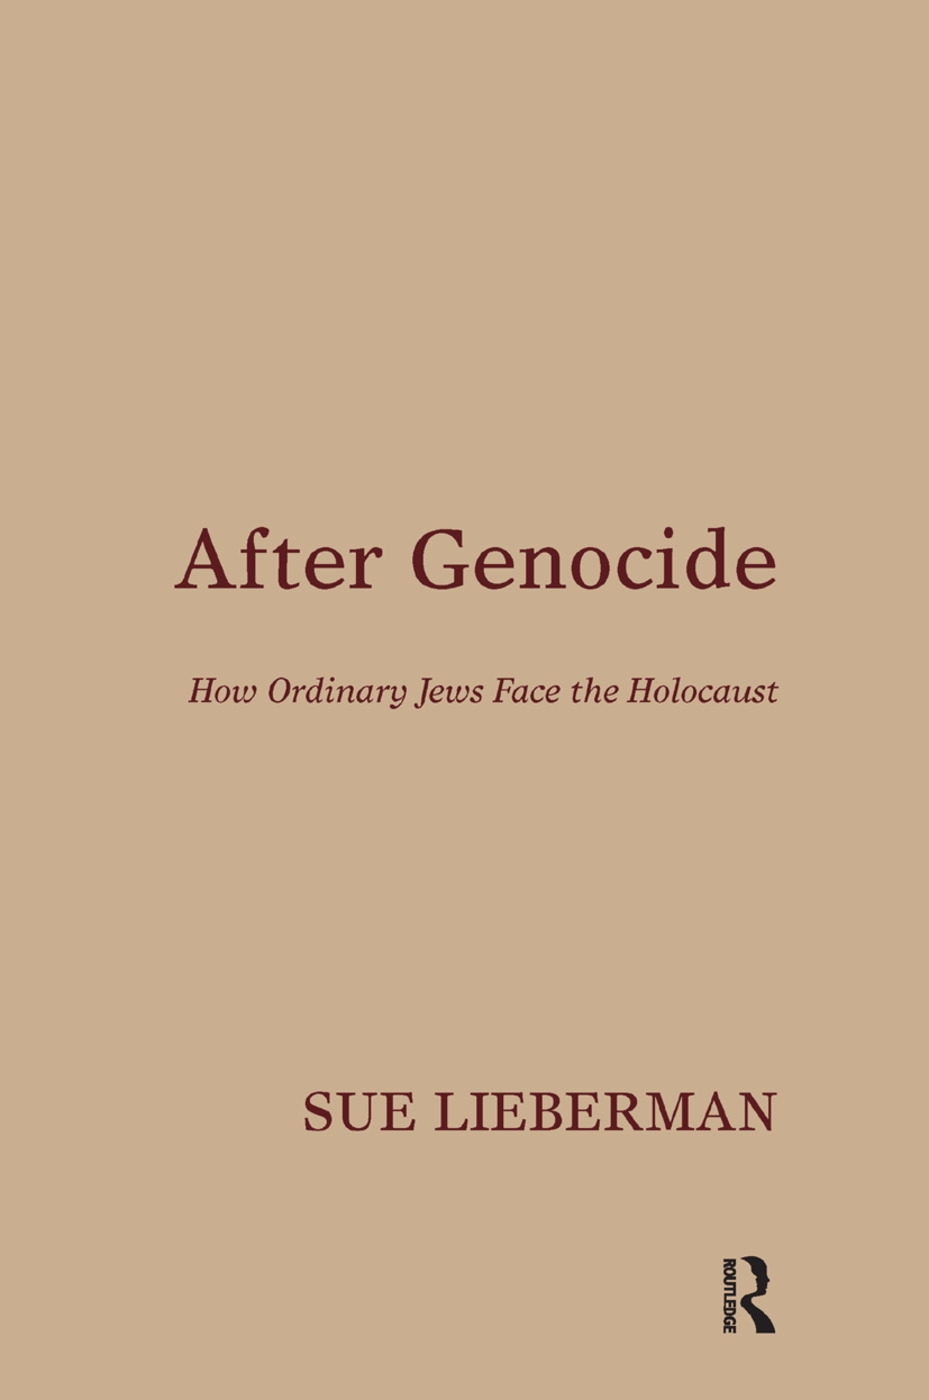 After Genocide: How Ordinary Jews Face the Holocaust